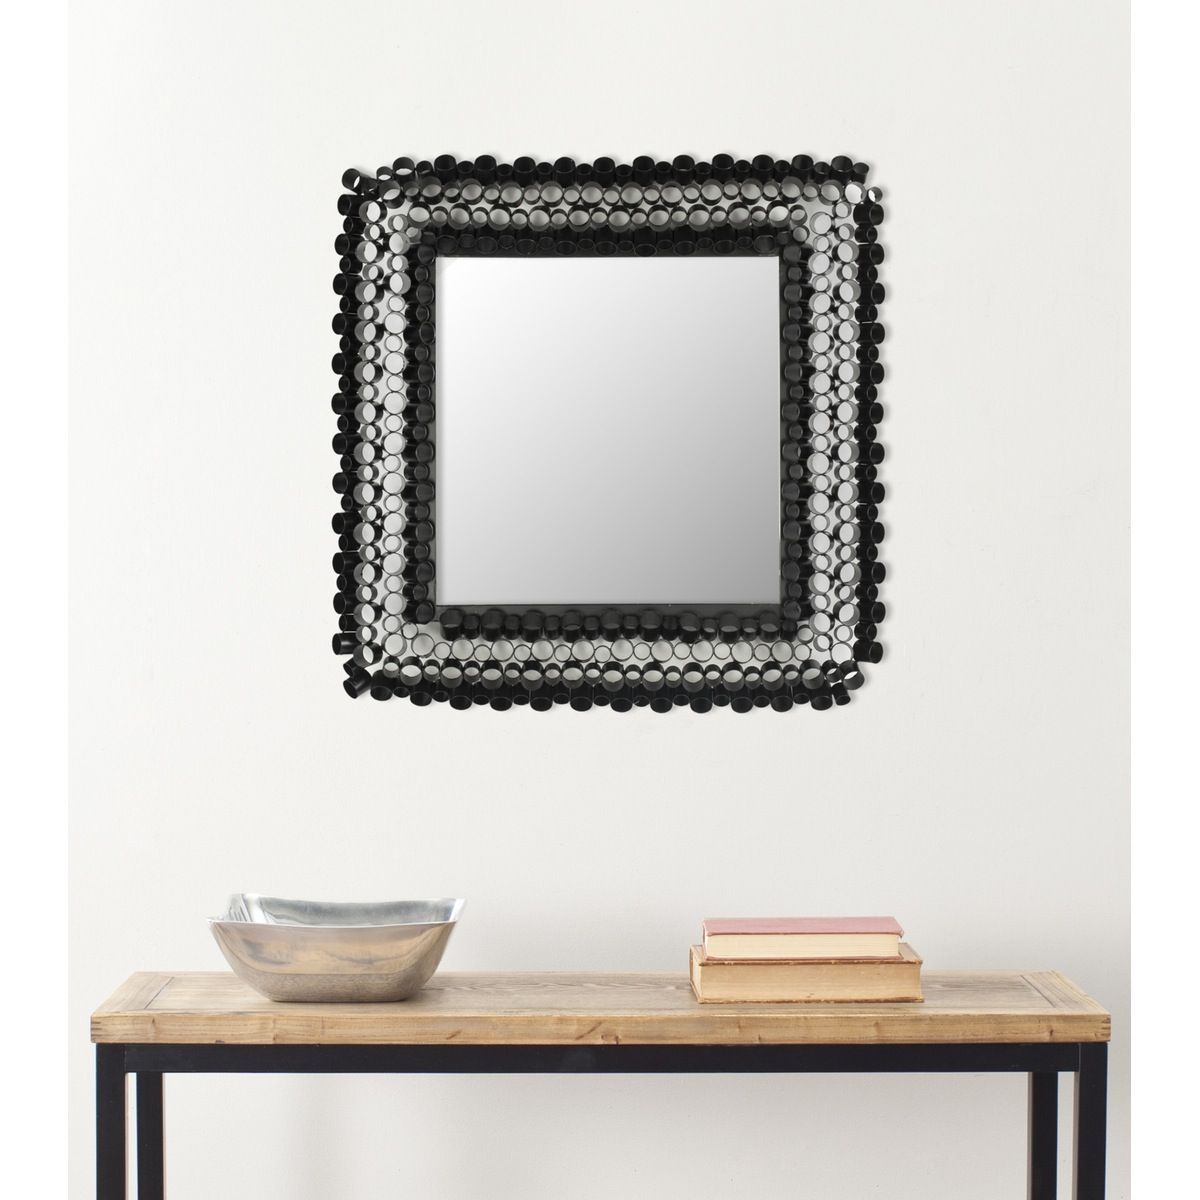 The Square Tube Mirror, With Its Dark Glossy Finish, Makes A Within Square Modern Wall Mirrors (View 4 of 15)